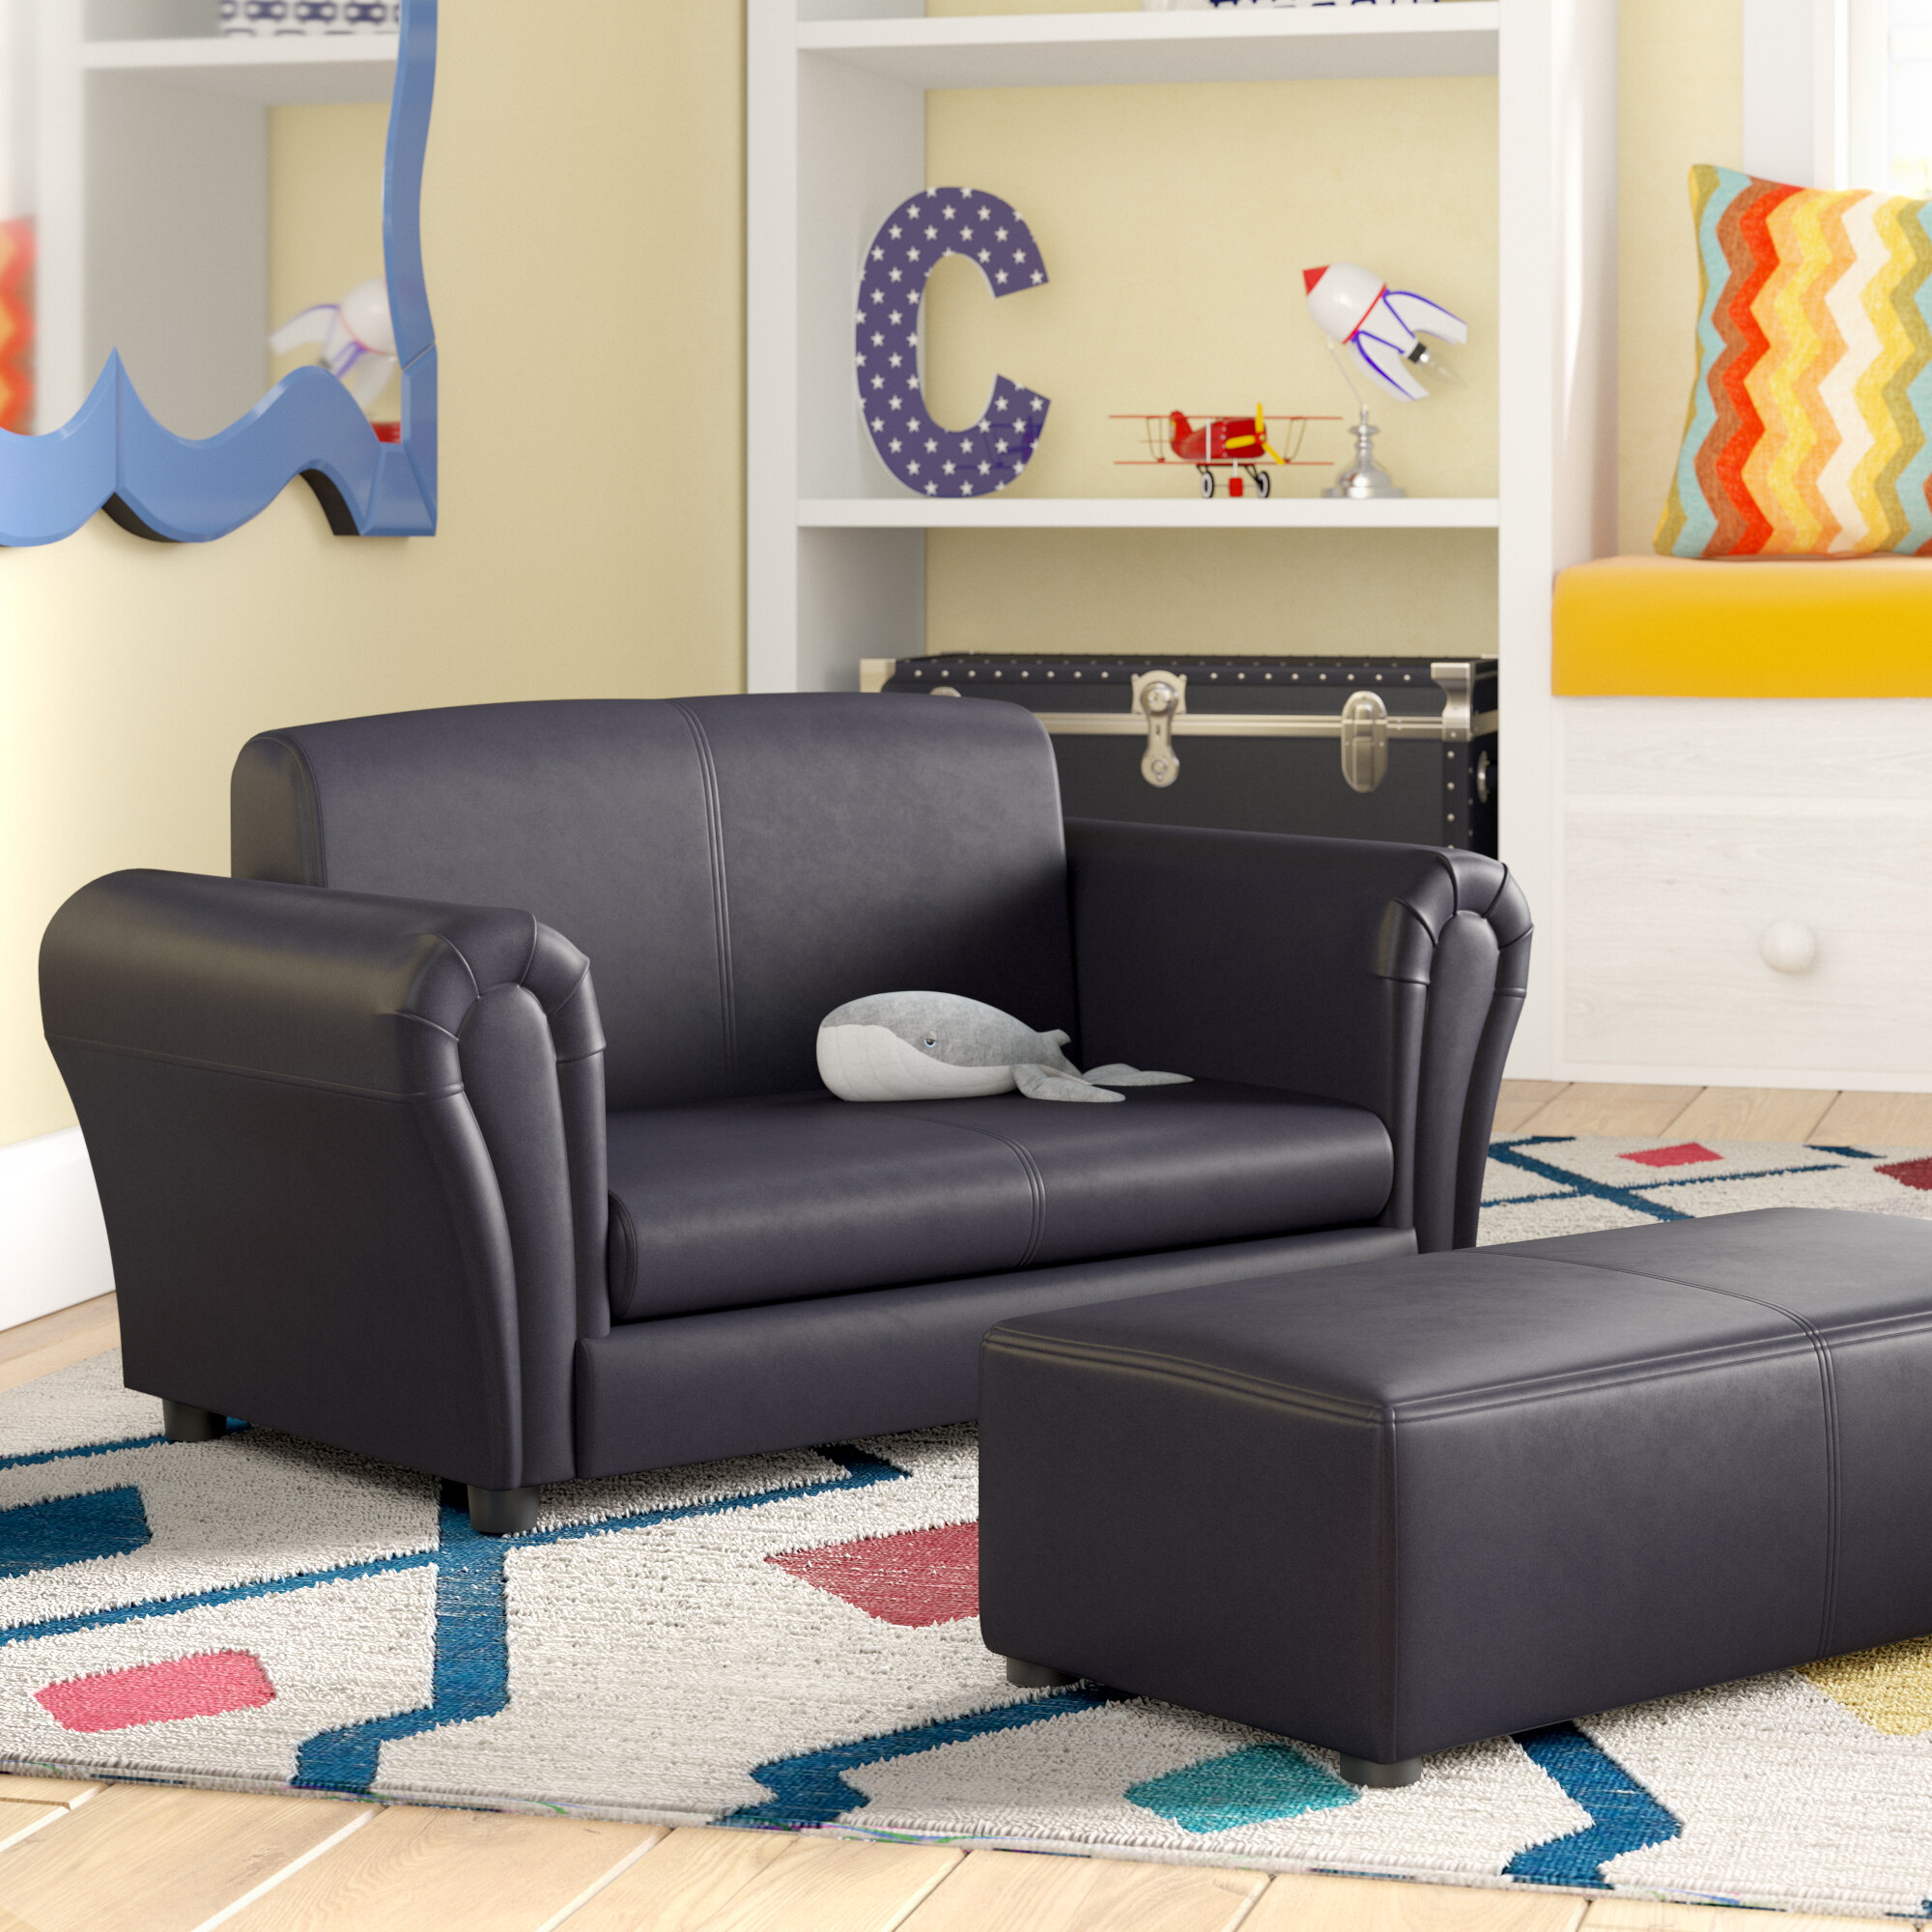 reading chair for kids room